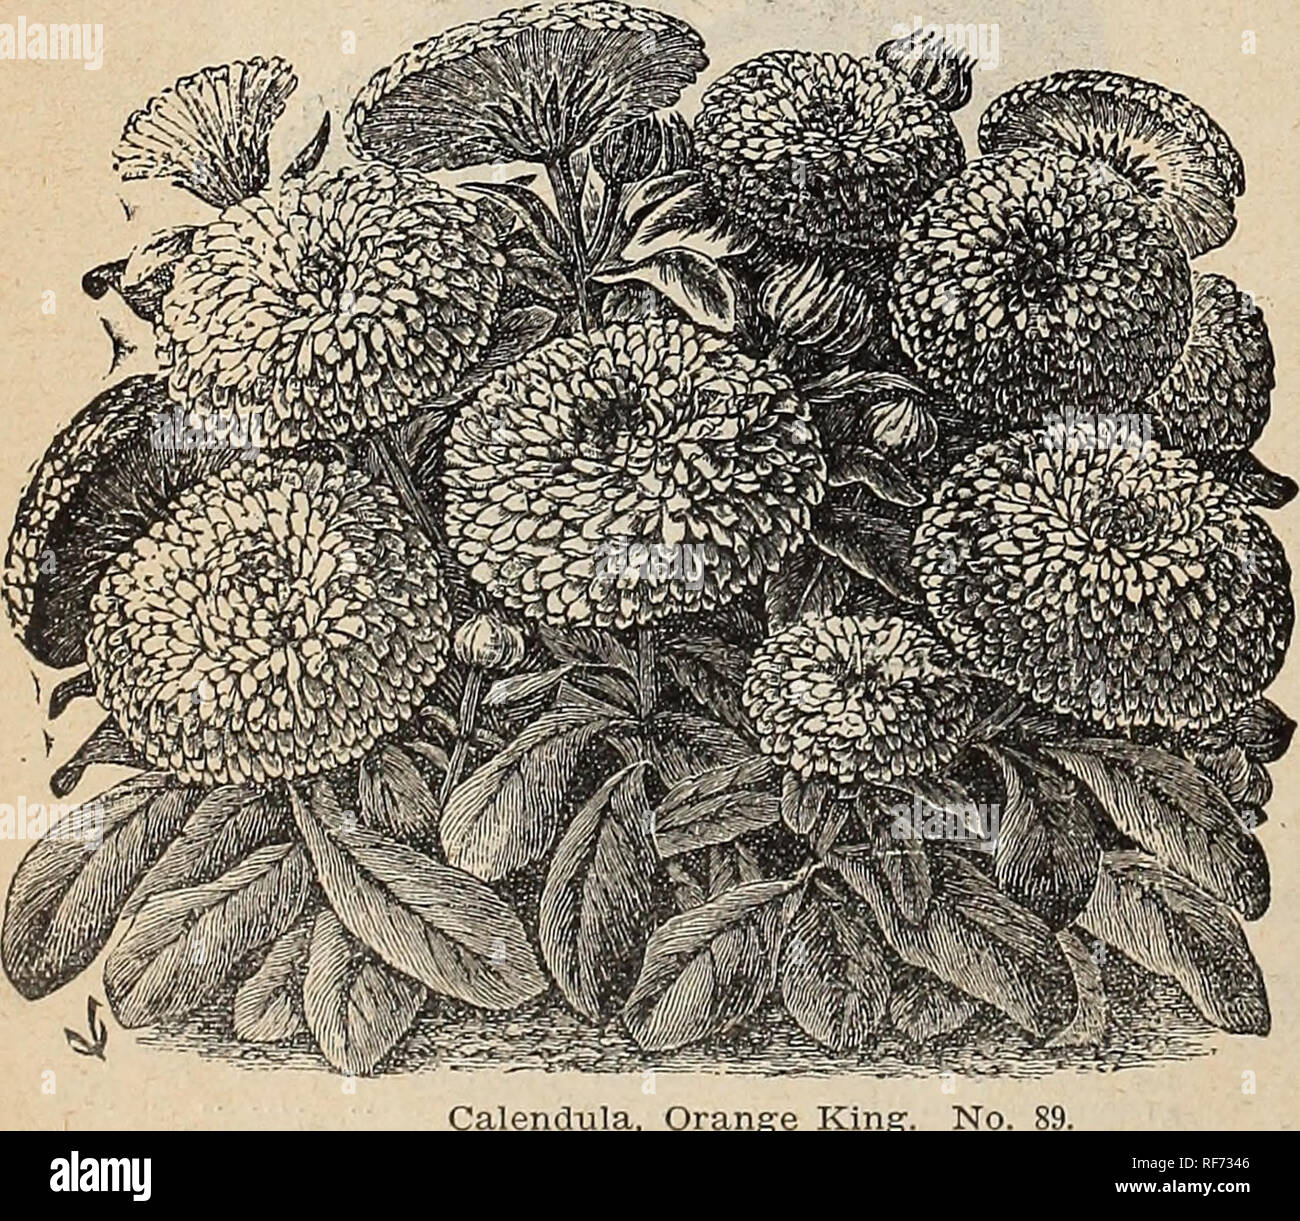 . Wm. Ewing &amp; Co.'s seed catalogue. Nursery stock Que?bec (Province) Montre?al Catalogs; Vegetables Seeds Catalogs; Grasses Seeds Catalogs; Flowers Seeds Catalogs; Plants, Ornamental Catalogs; Agricultural implements Catalogs. 89 90, 91. 92 93. 94. Calendula Meteor. No. 90. CALENDULA Oranee King—A fine extra double and very floriferous variety, h. a.. 5 &quot; Meteor—Large double yellow flowers striped with orange, h. a 5 Sulphur Crown—Sulphur color, h. a. 5 Double Yellow—Pure golden double flowers of great size. h. a 5 &quot; Pon.iei—Double white, very useful for bouquets.. 5 Mixed Variet Stock Photo